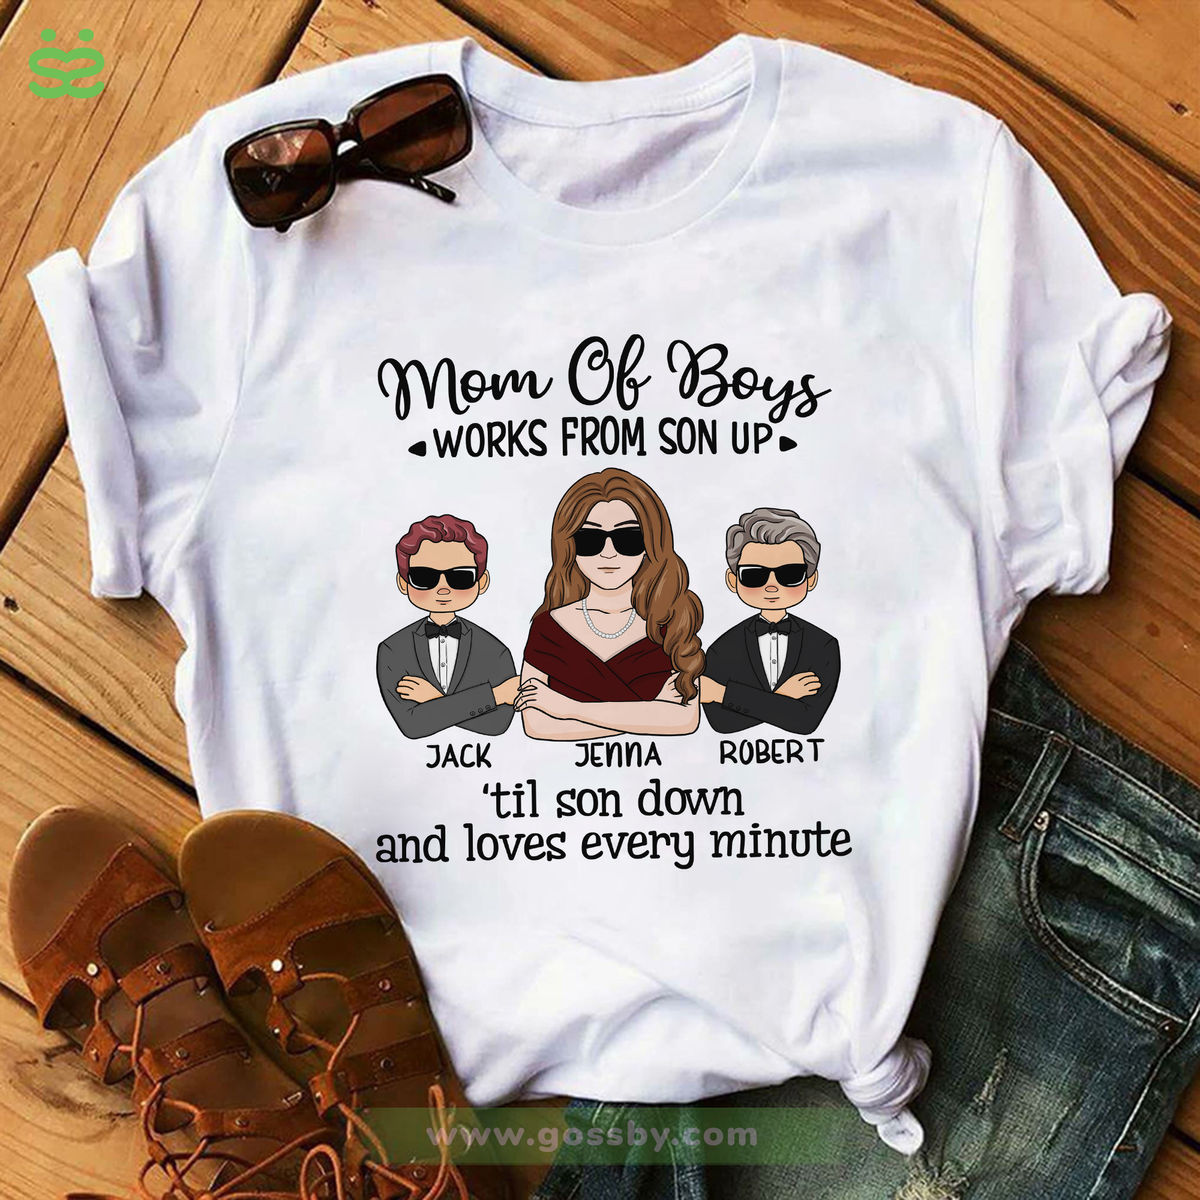 Personalized Shirt - Family - Mom & Son - Mom of boys Works from son up  'til son down and loves every minute (6450)_2